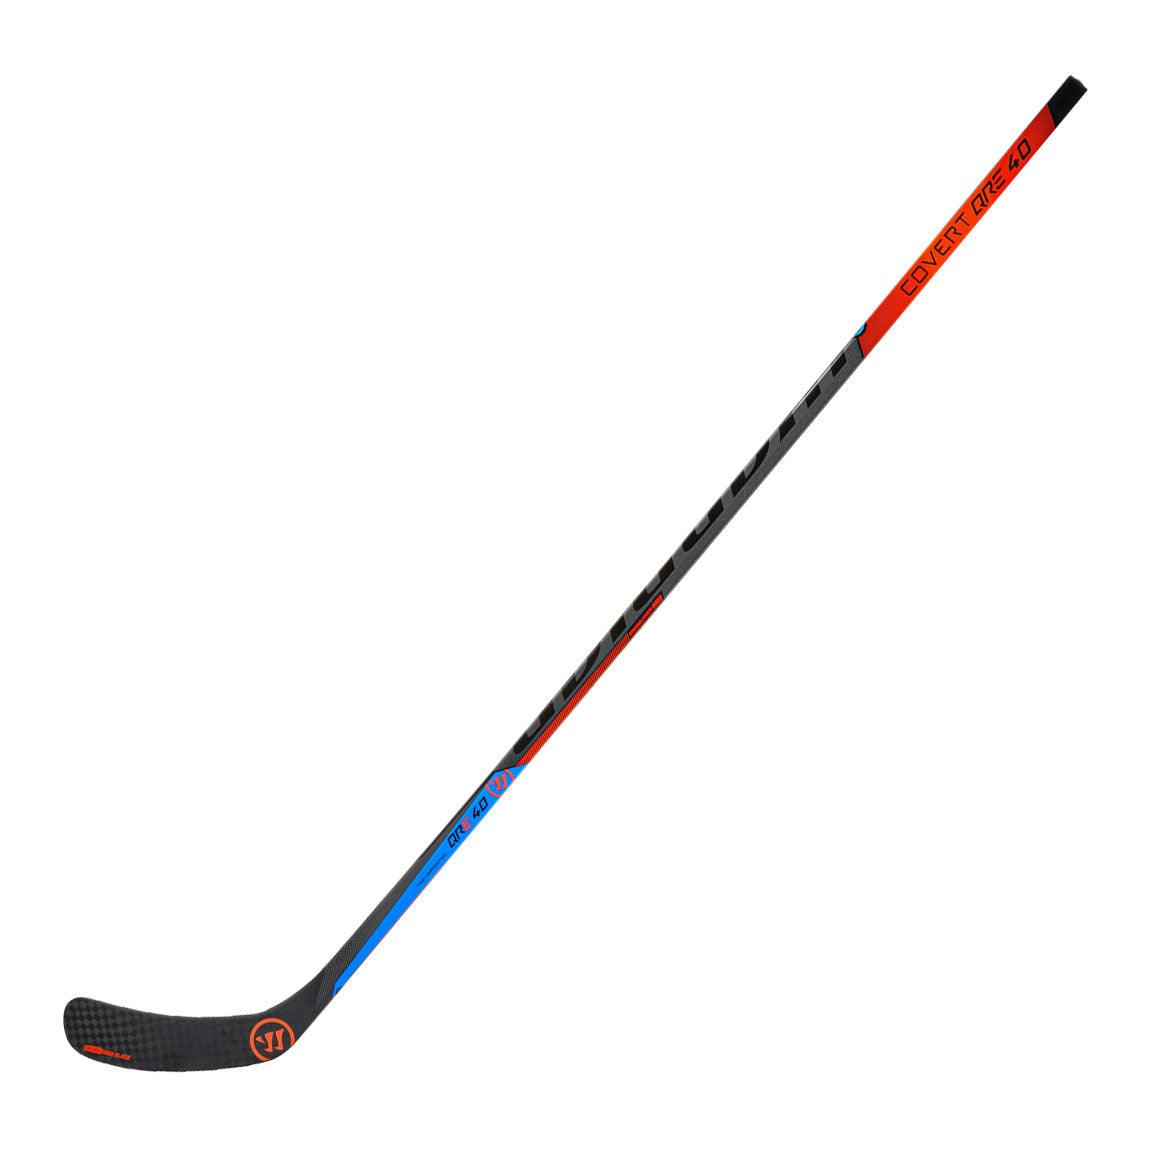 Covert QRE 40 Hockey Stick - Intermediate - Sports Excellence